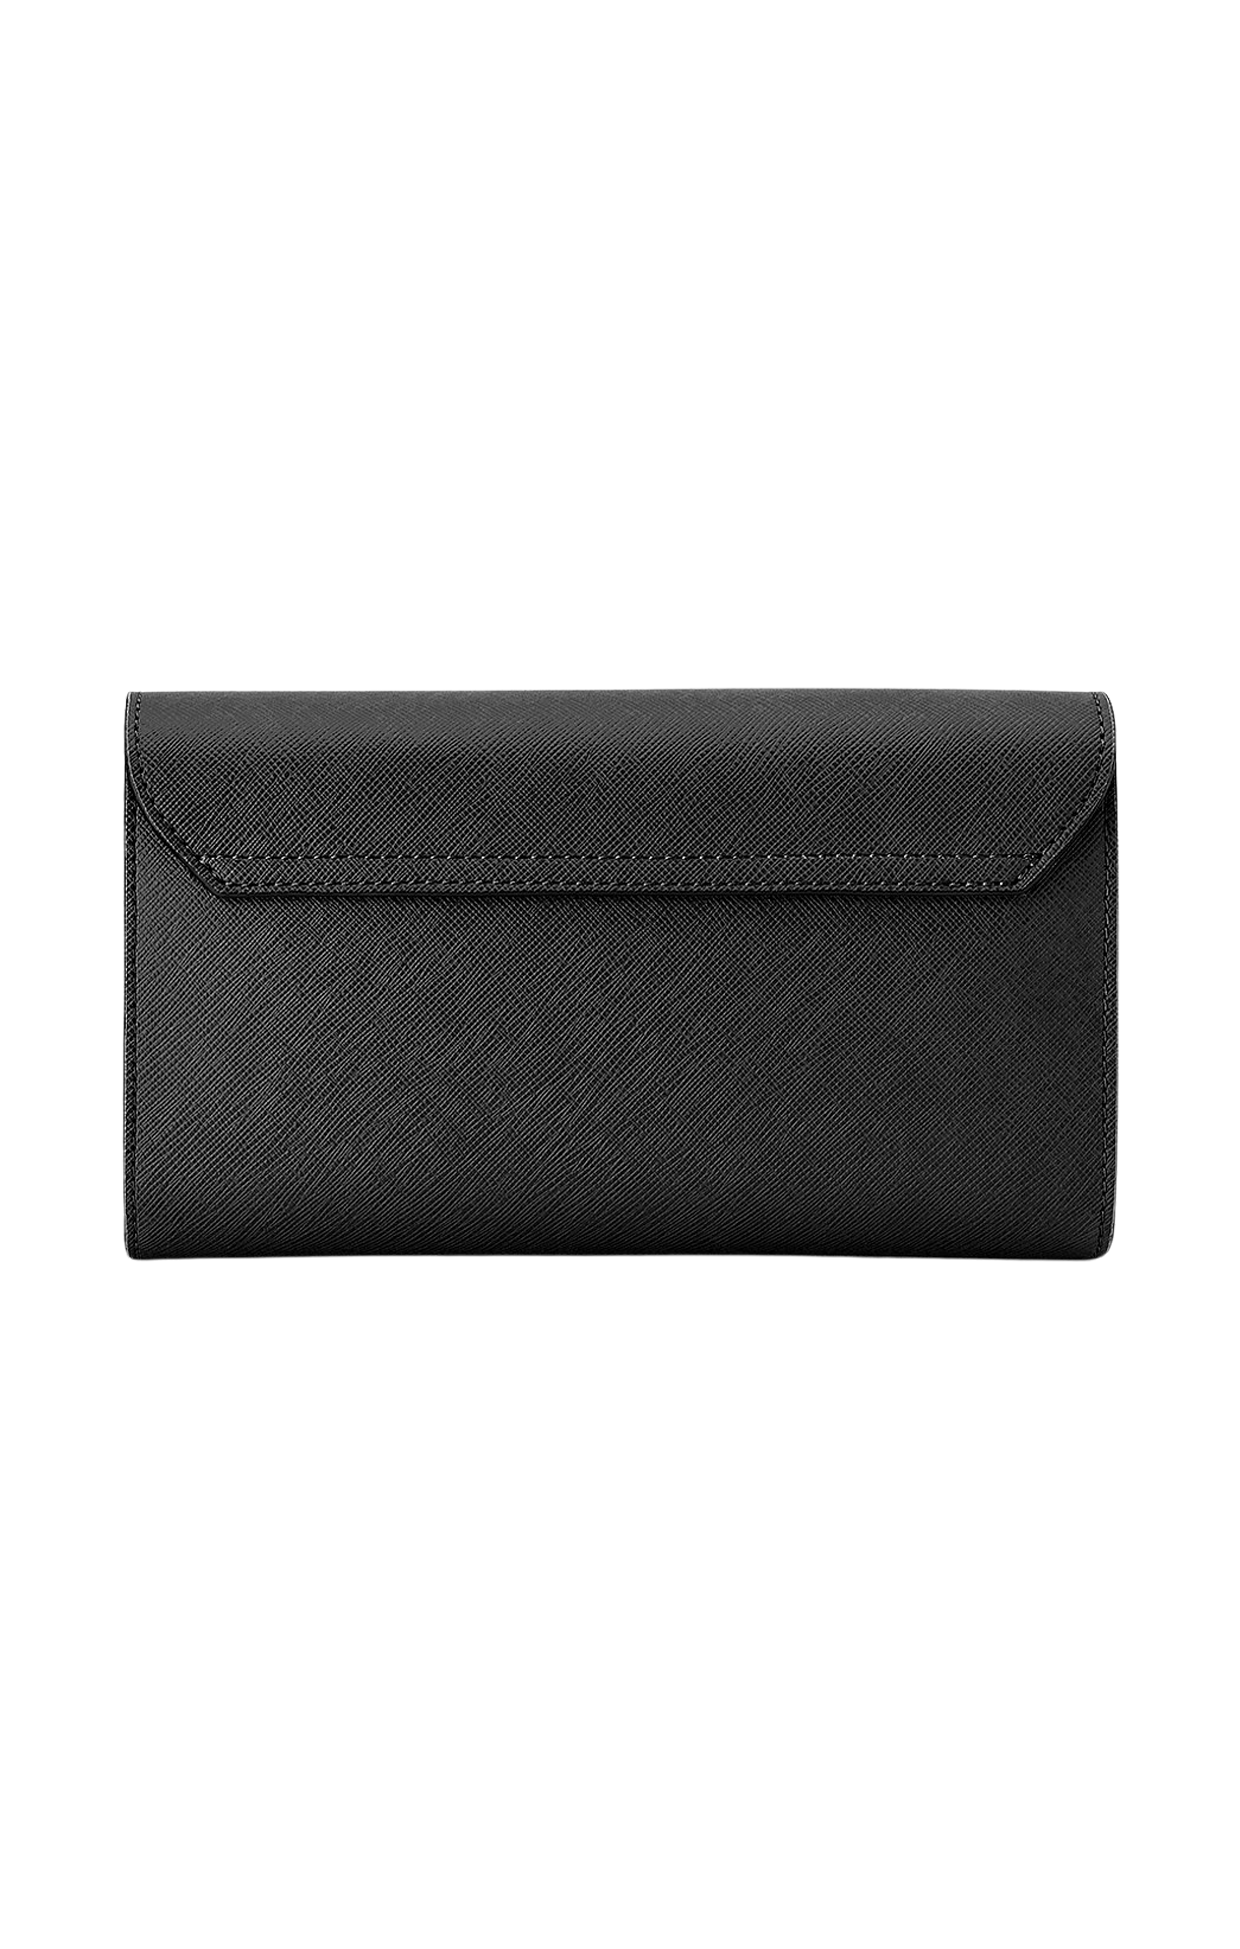 ACCESSORIES Bags Clutches One Size / Black NIC ENVELOPE CLUTCH IN BLACK